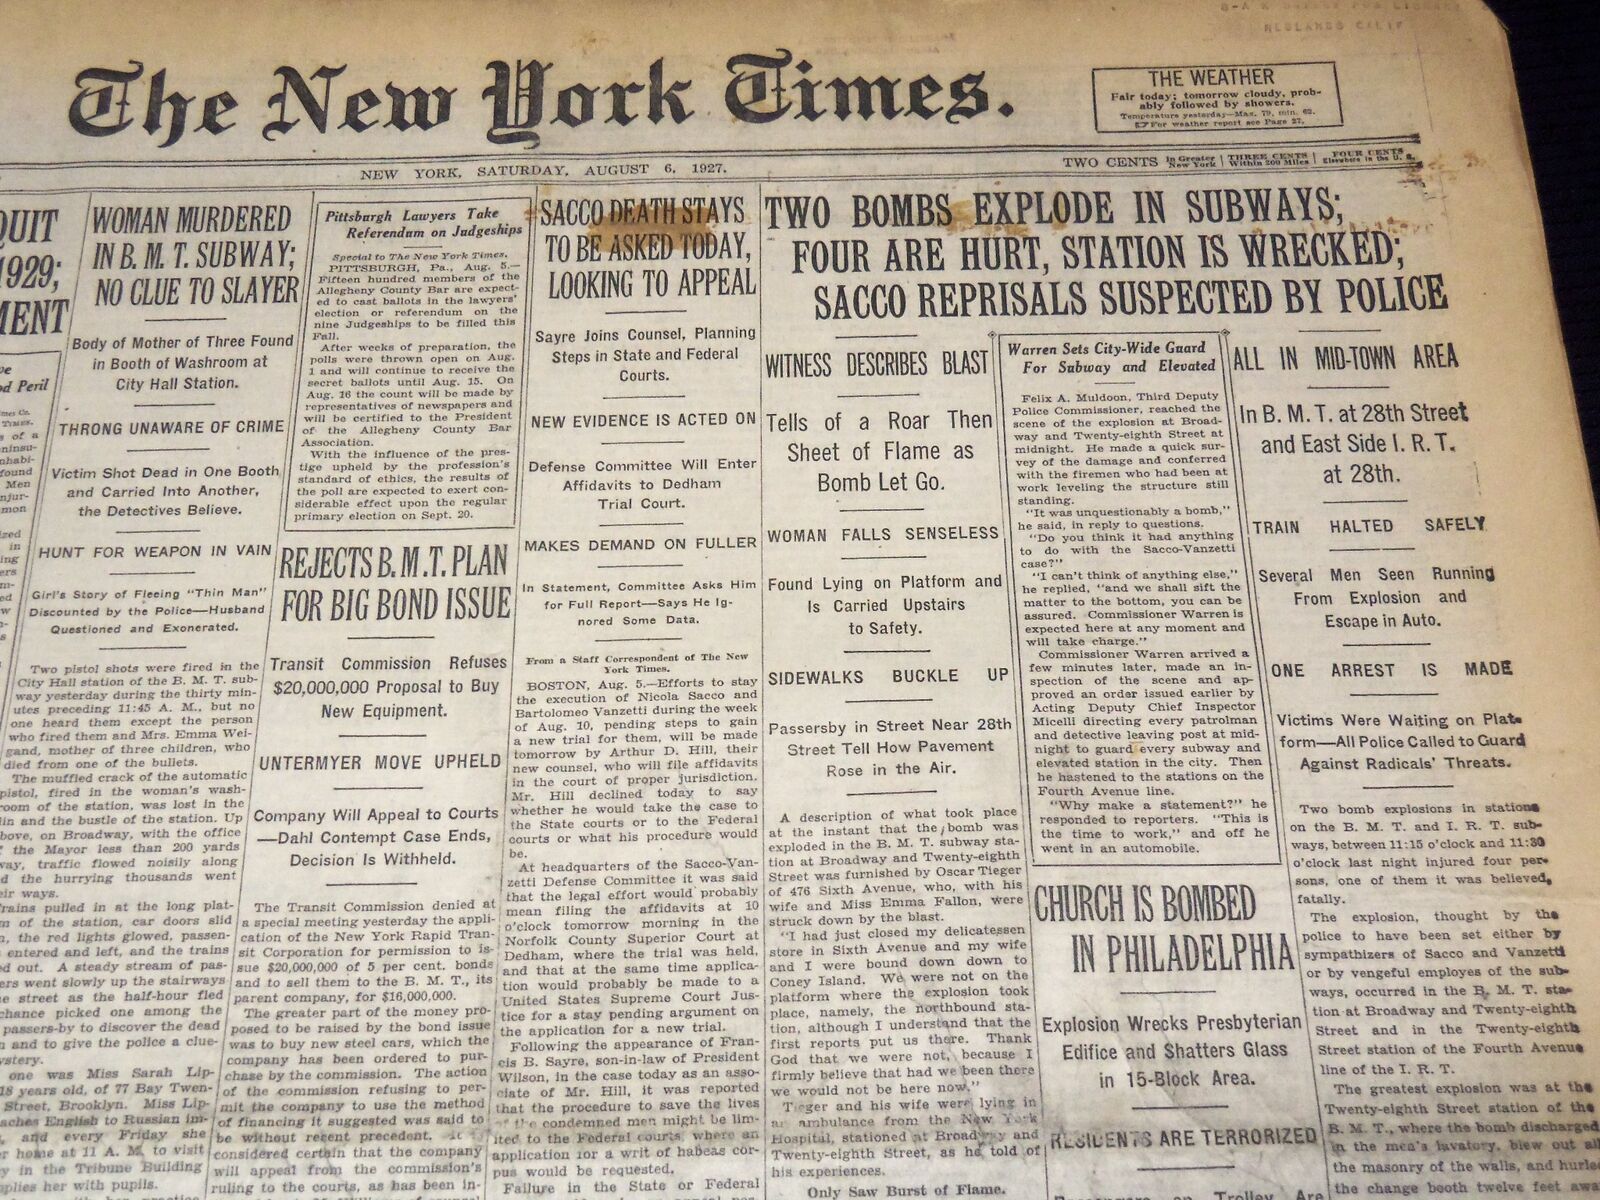 1927 AUGUST 6 NEW YORK TIMES NEWSPAPER - SACCO REPRISALS SUSPECTED - NT 9563